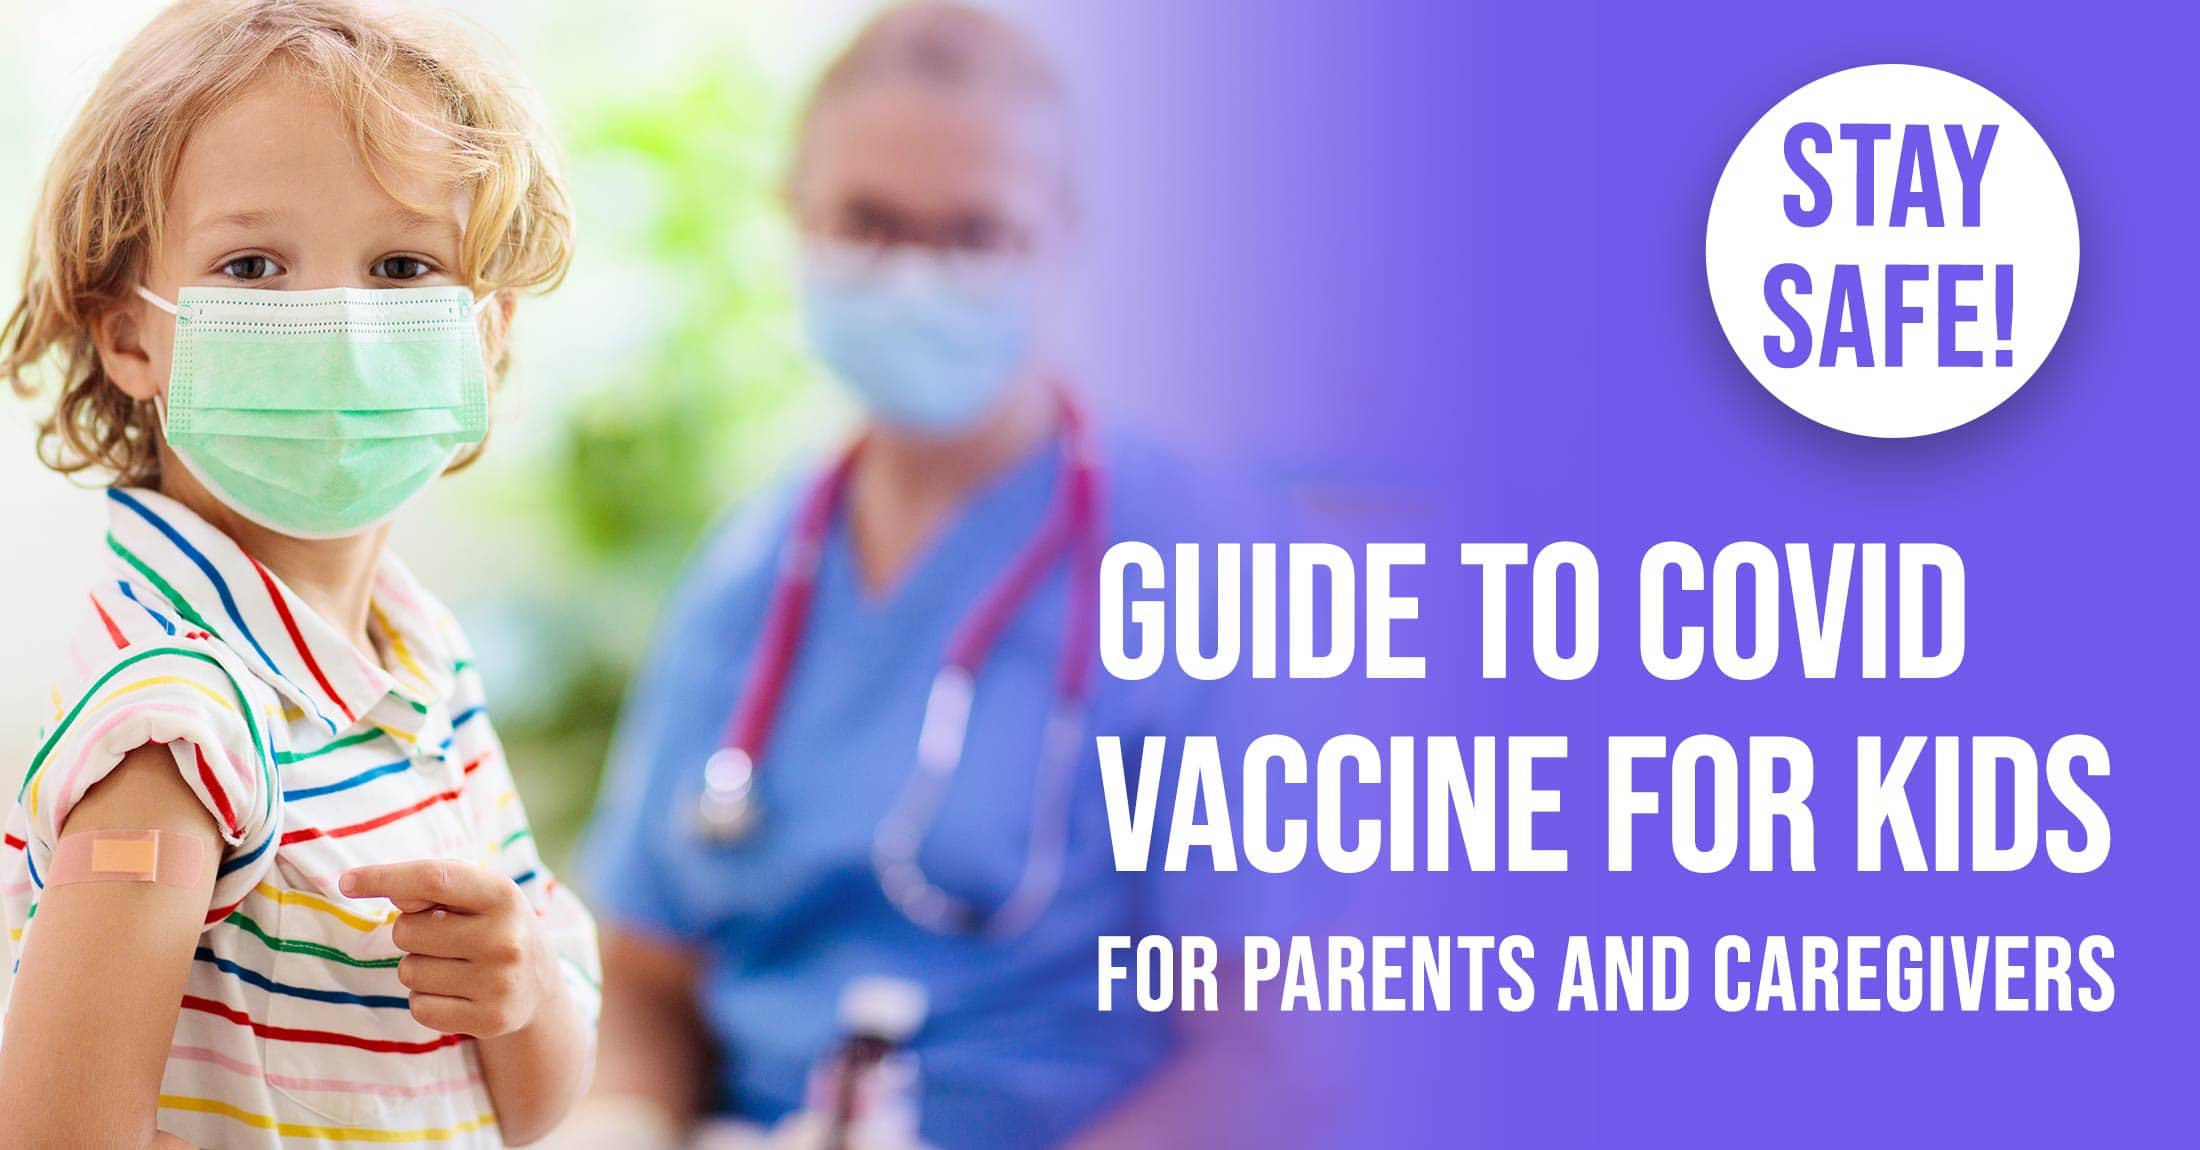 Dr Dina Kulik - GUide to COVID Vaccine for Kids